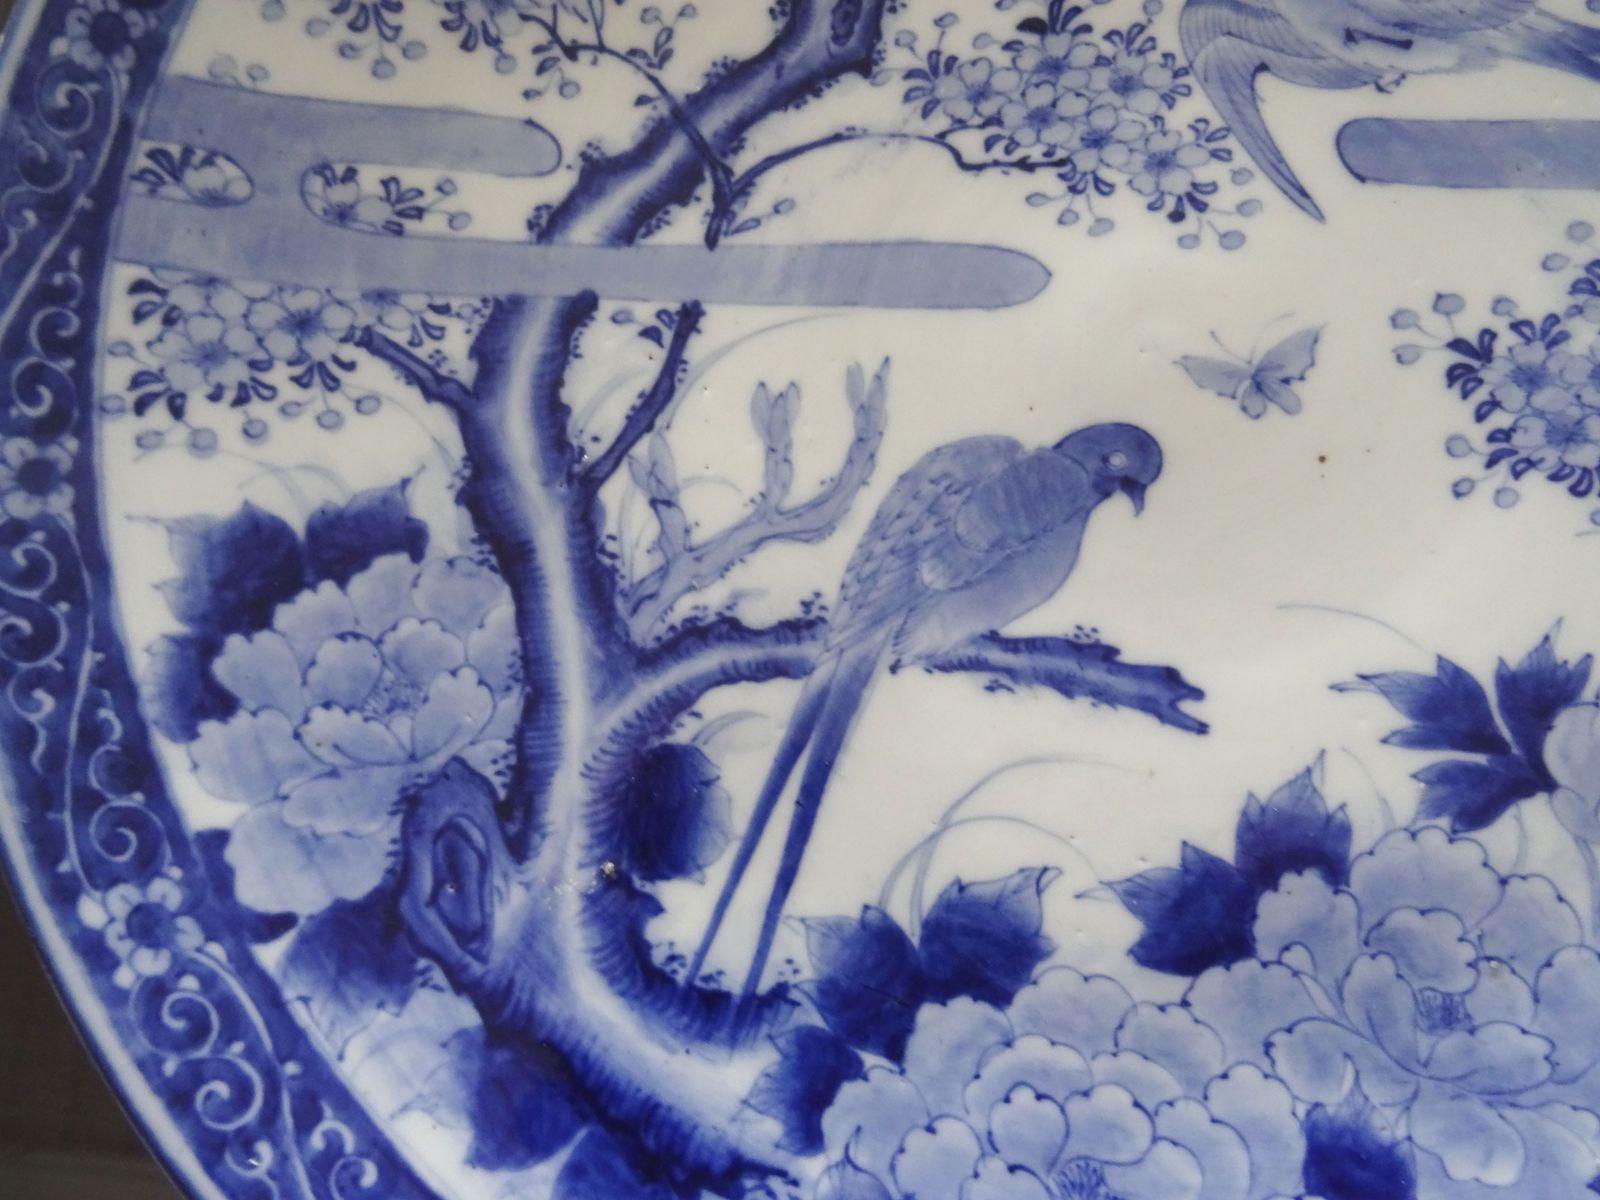 Large Antique Japanese Blue & White Porcelain Plate, 19th century.

The antique Japanese blue and white porcelain plate dates back to the 19th century. The plate features a landscape scene depicted in the traditional blue and white style commonly